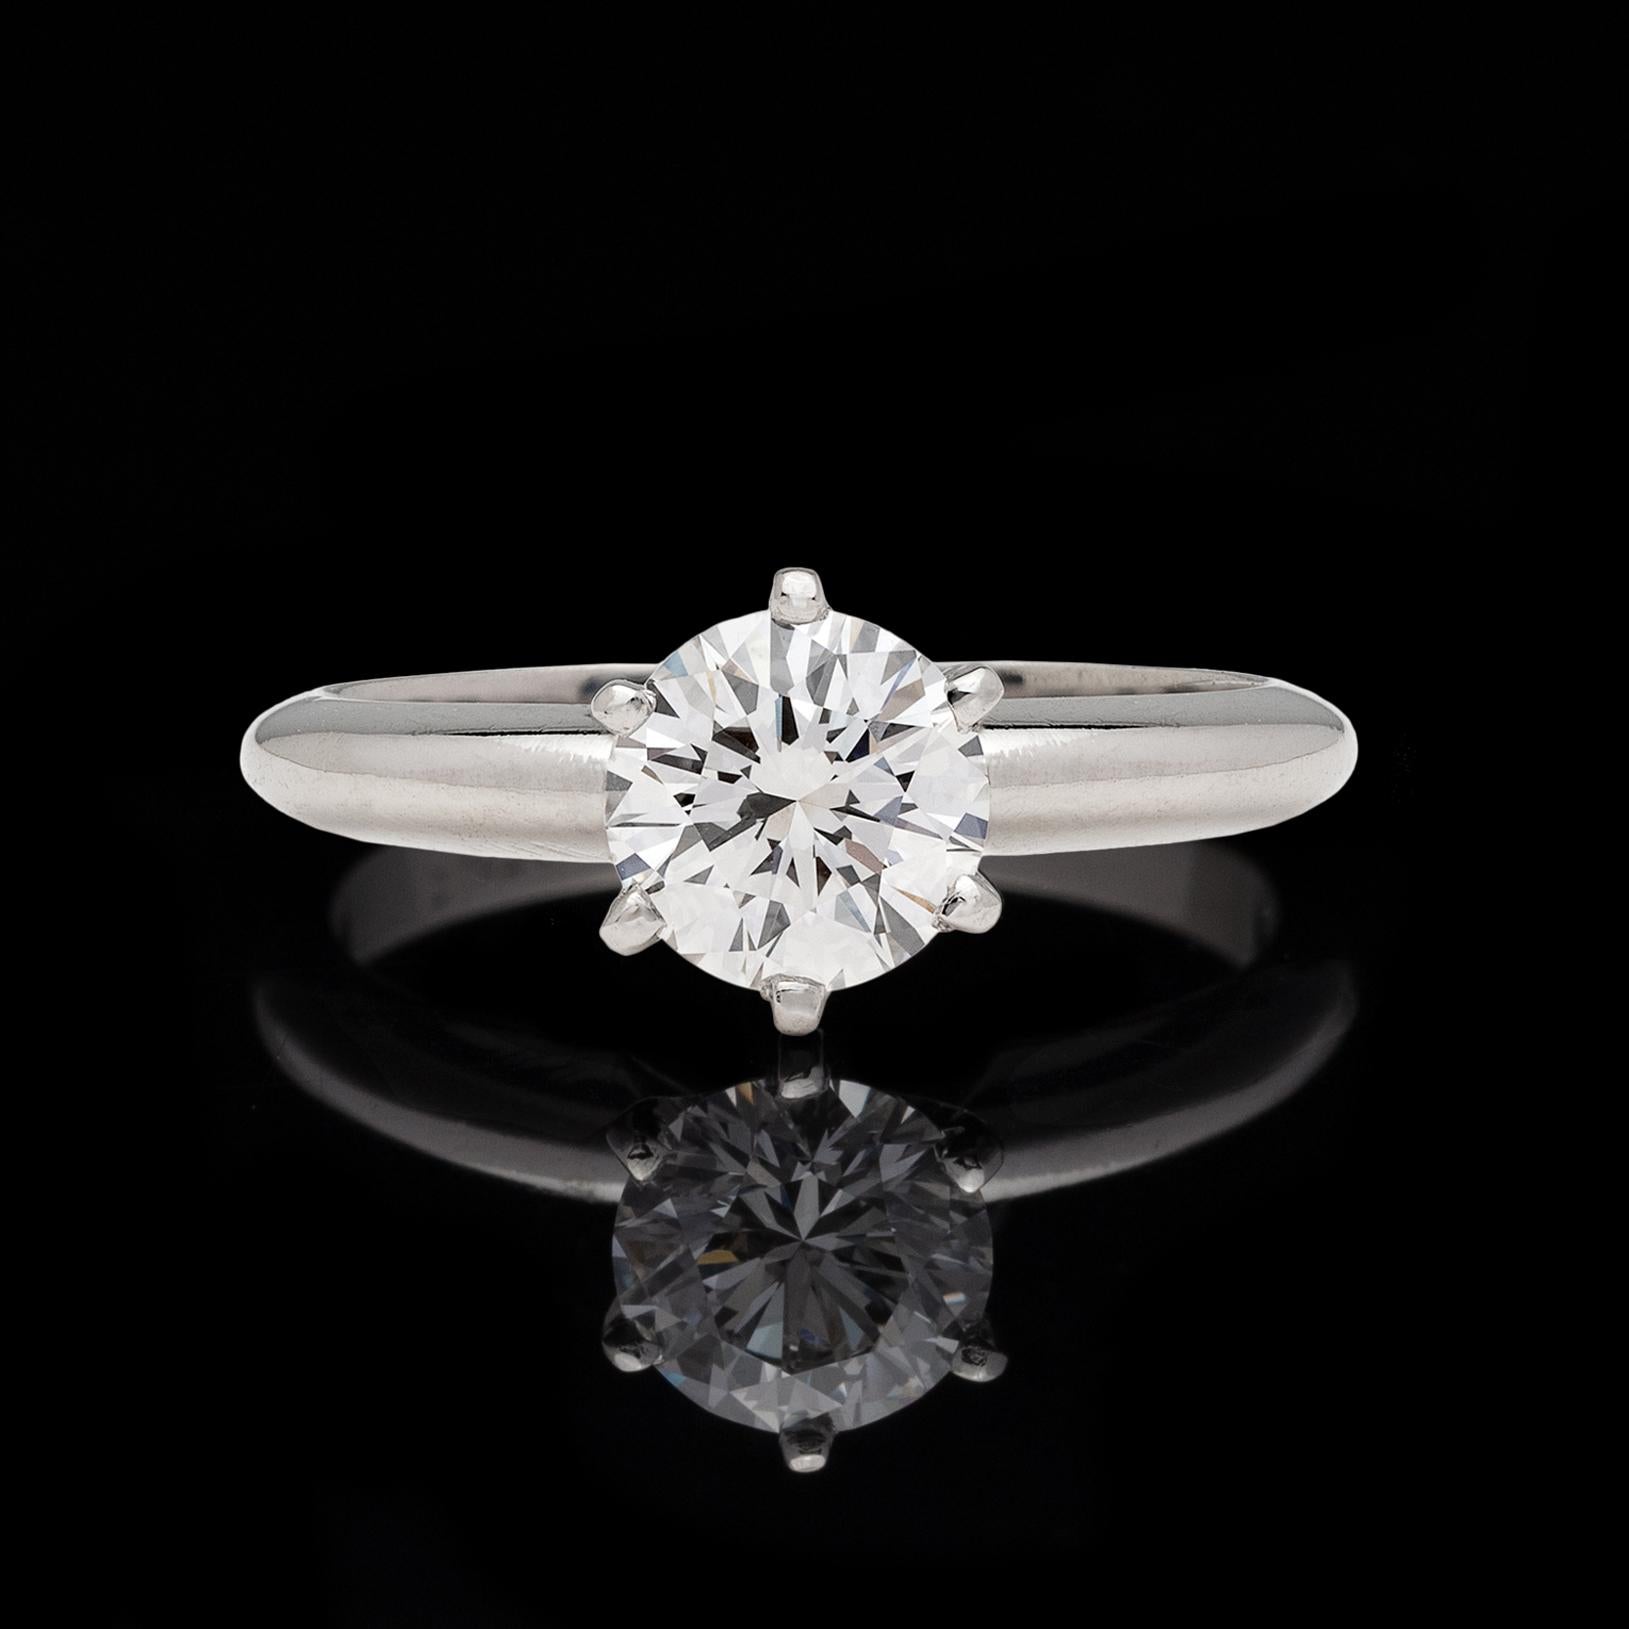 Give her the best of the best. This 1.02 carat round brilliant-cut diamond is GIA graded D color and VS2 clarity. Set in a 6-prong, classic platinum Tiffany-style mounting, the ring weighs 4.8 grams and is currently a size 5 3/4, with easy